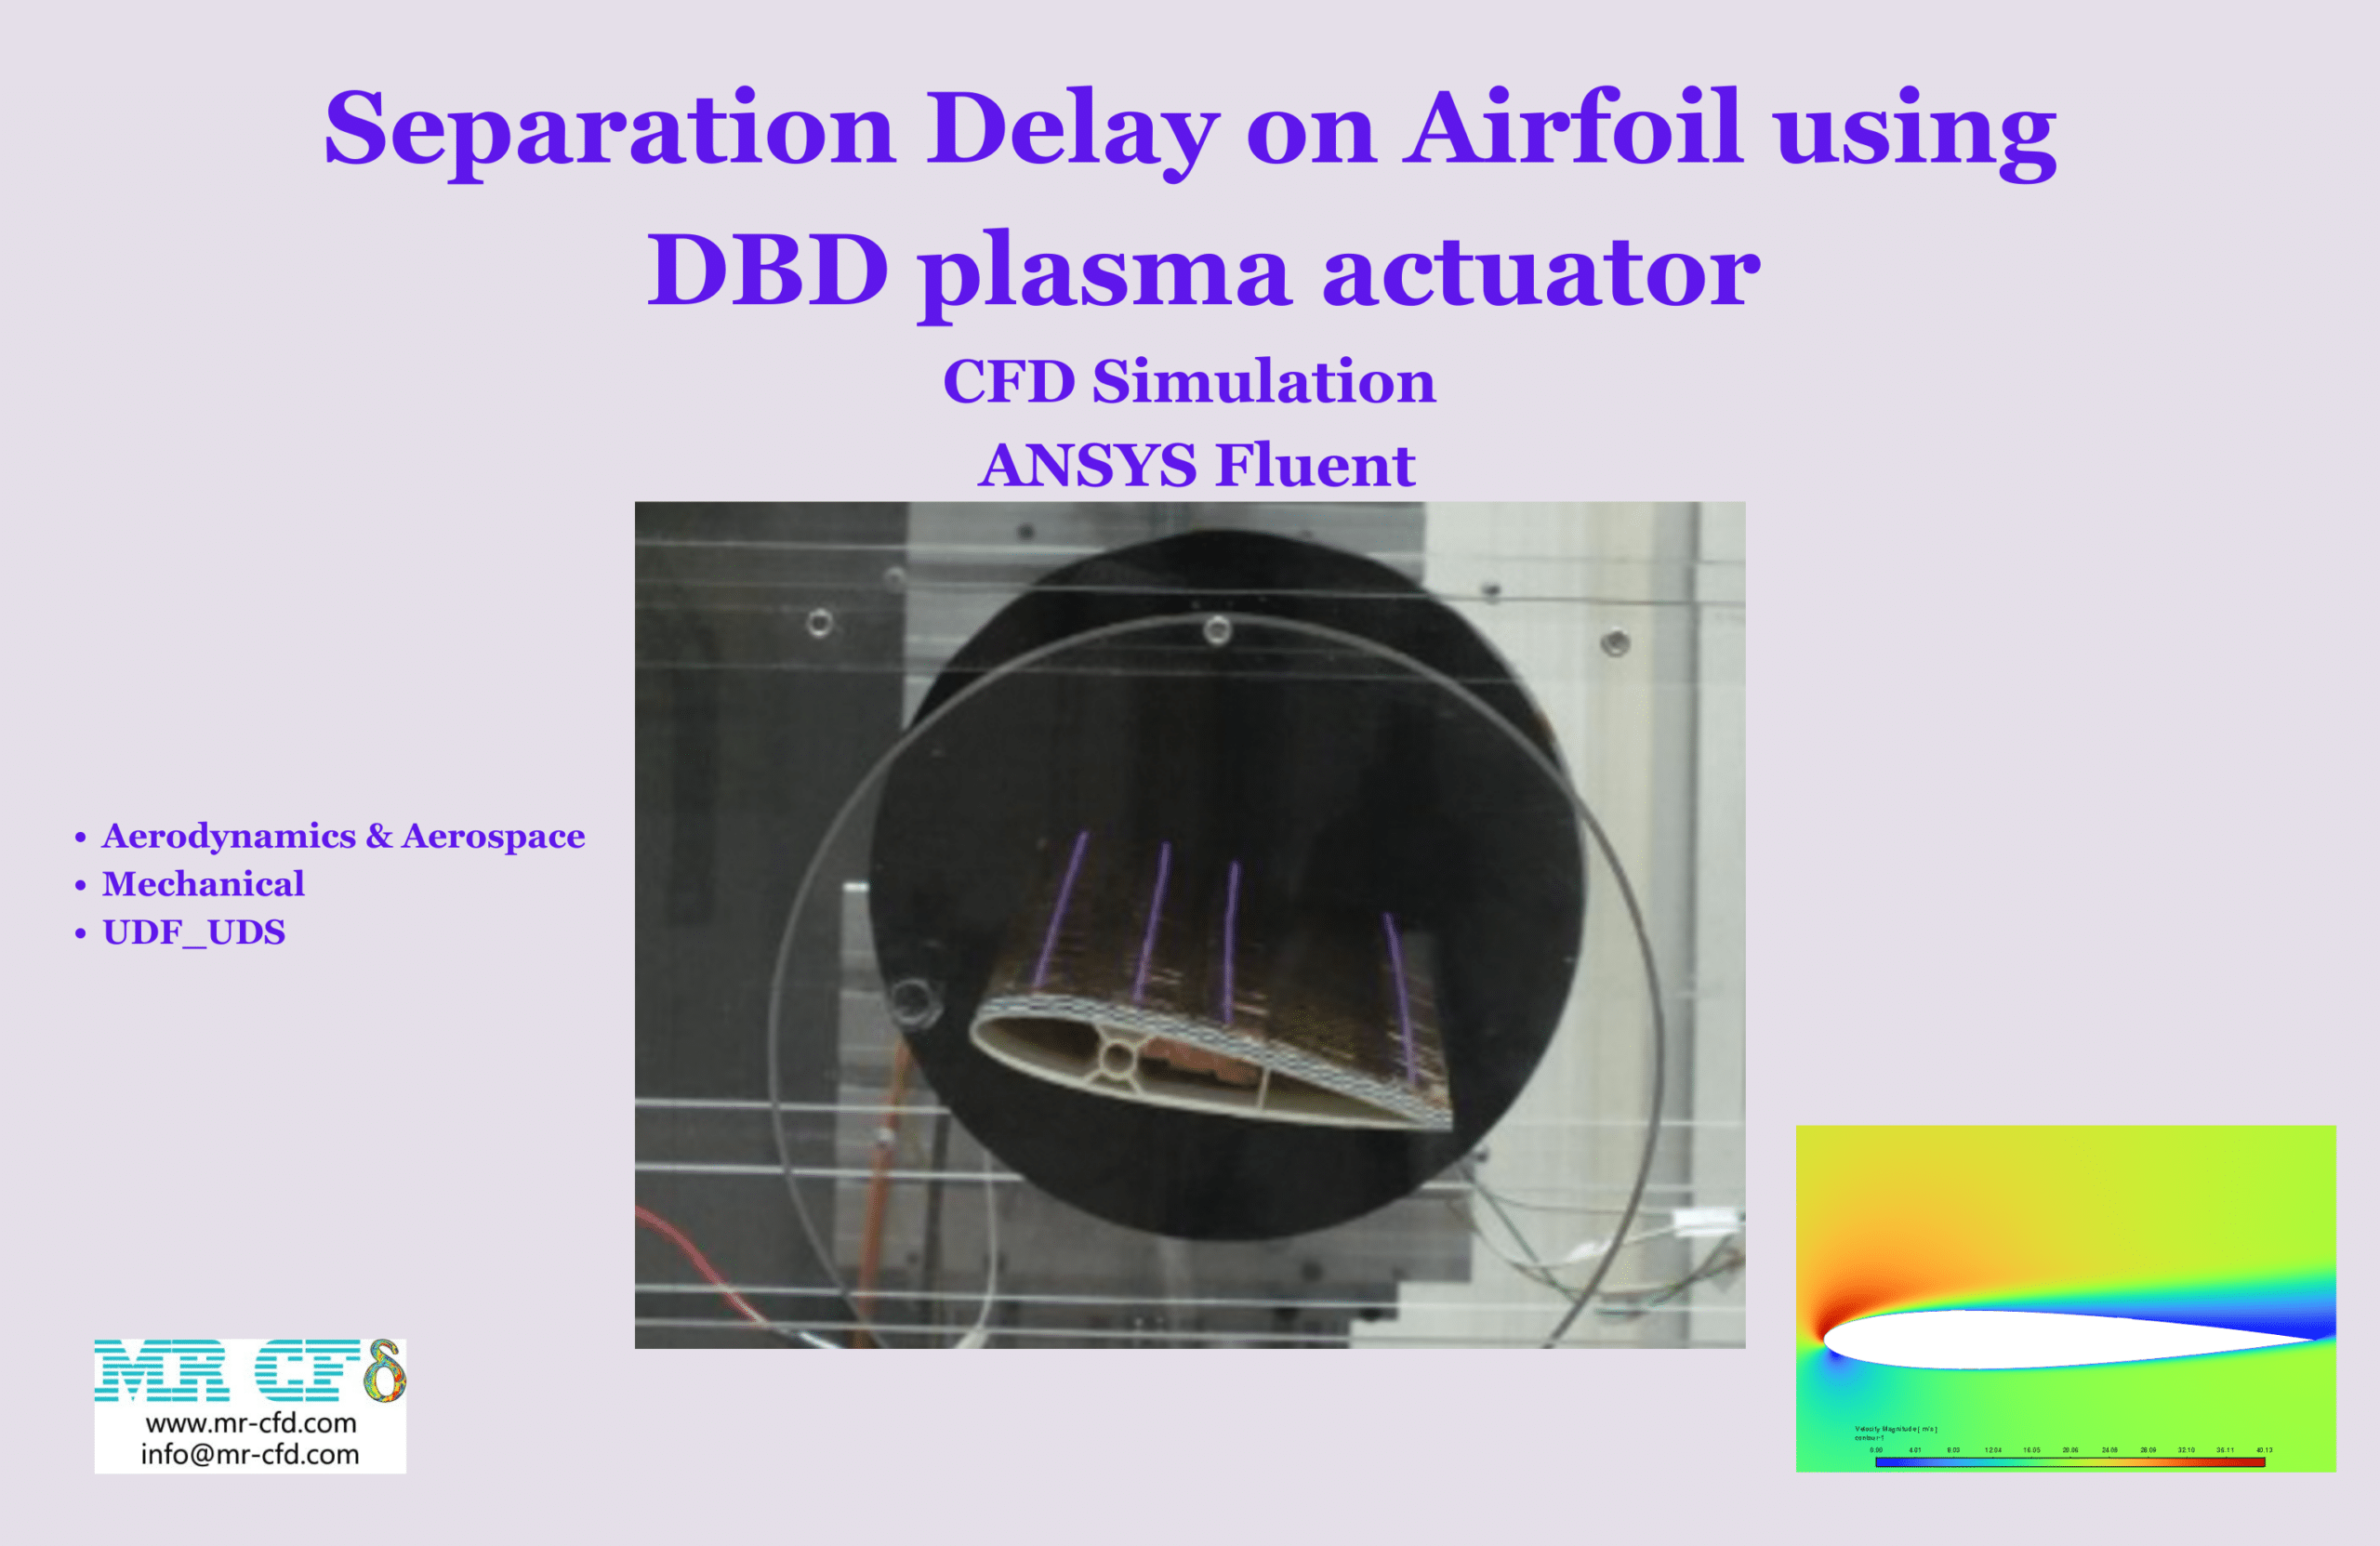 Separation Delay on Airfoil Using DBD plasma actuator, ANSYS Fluent